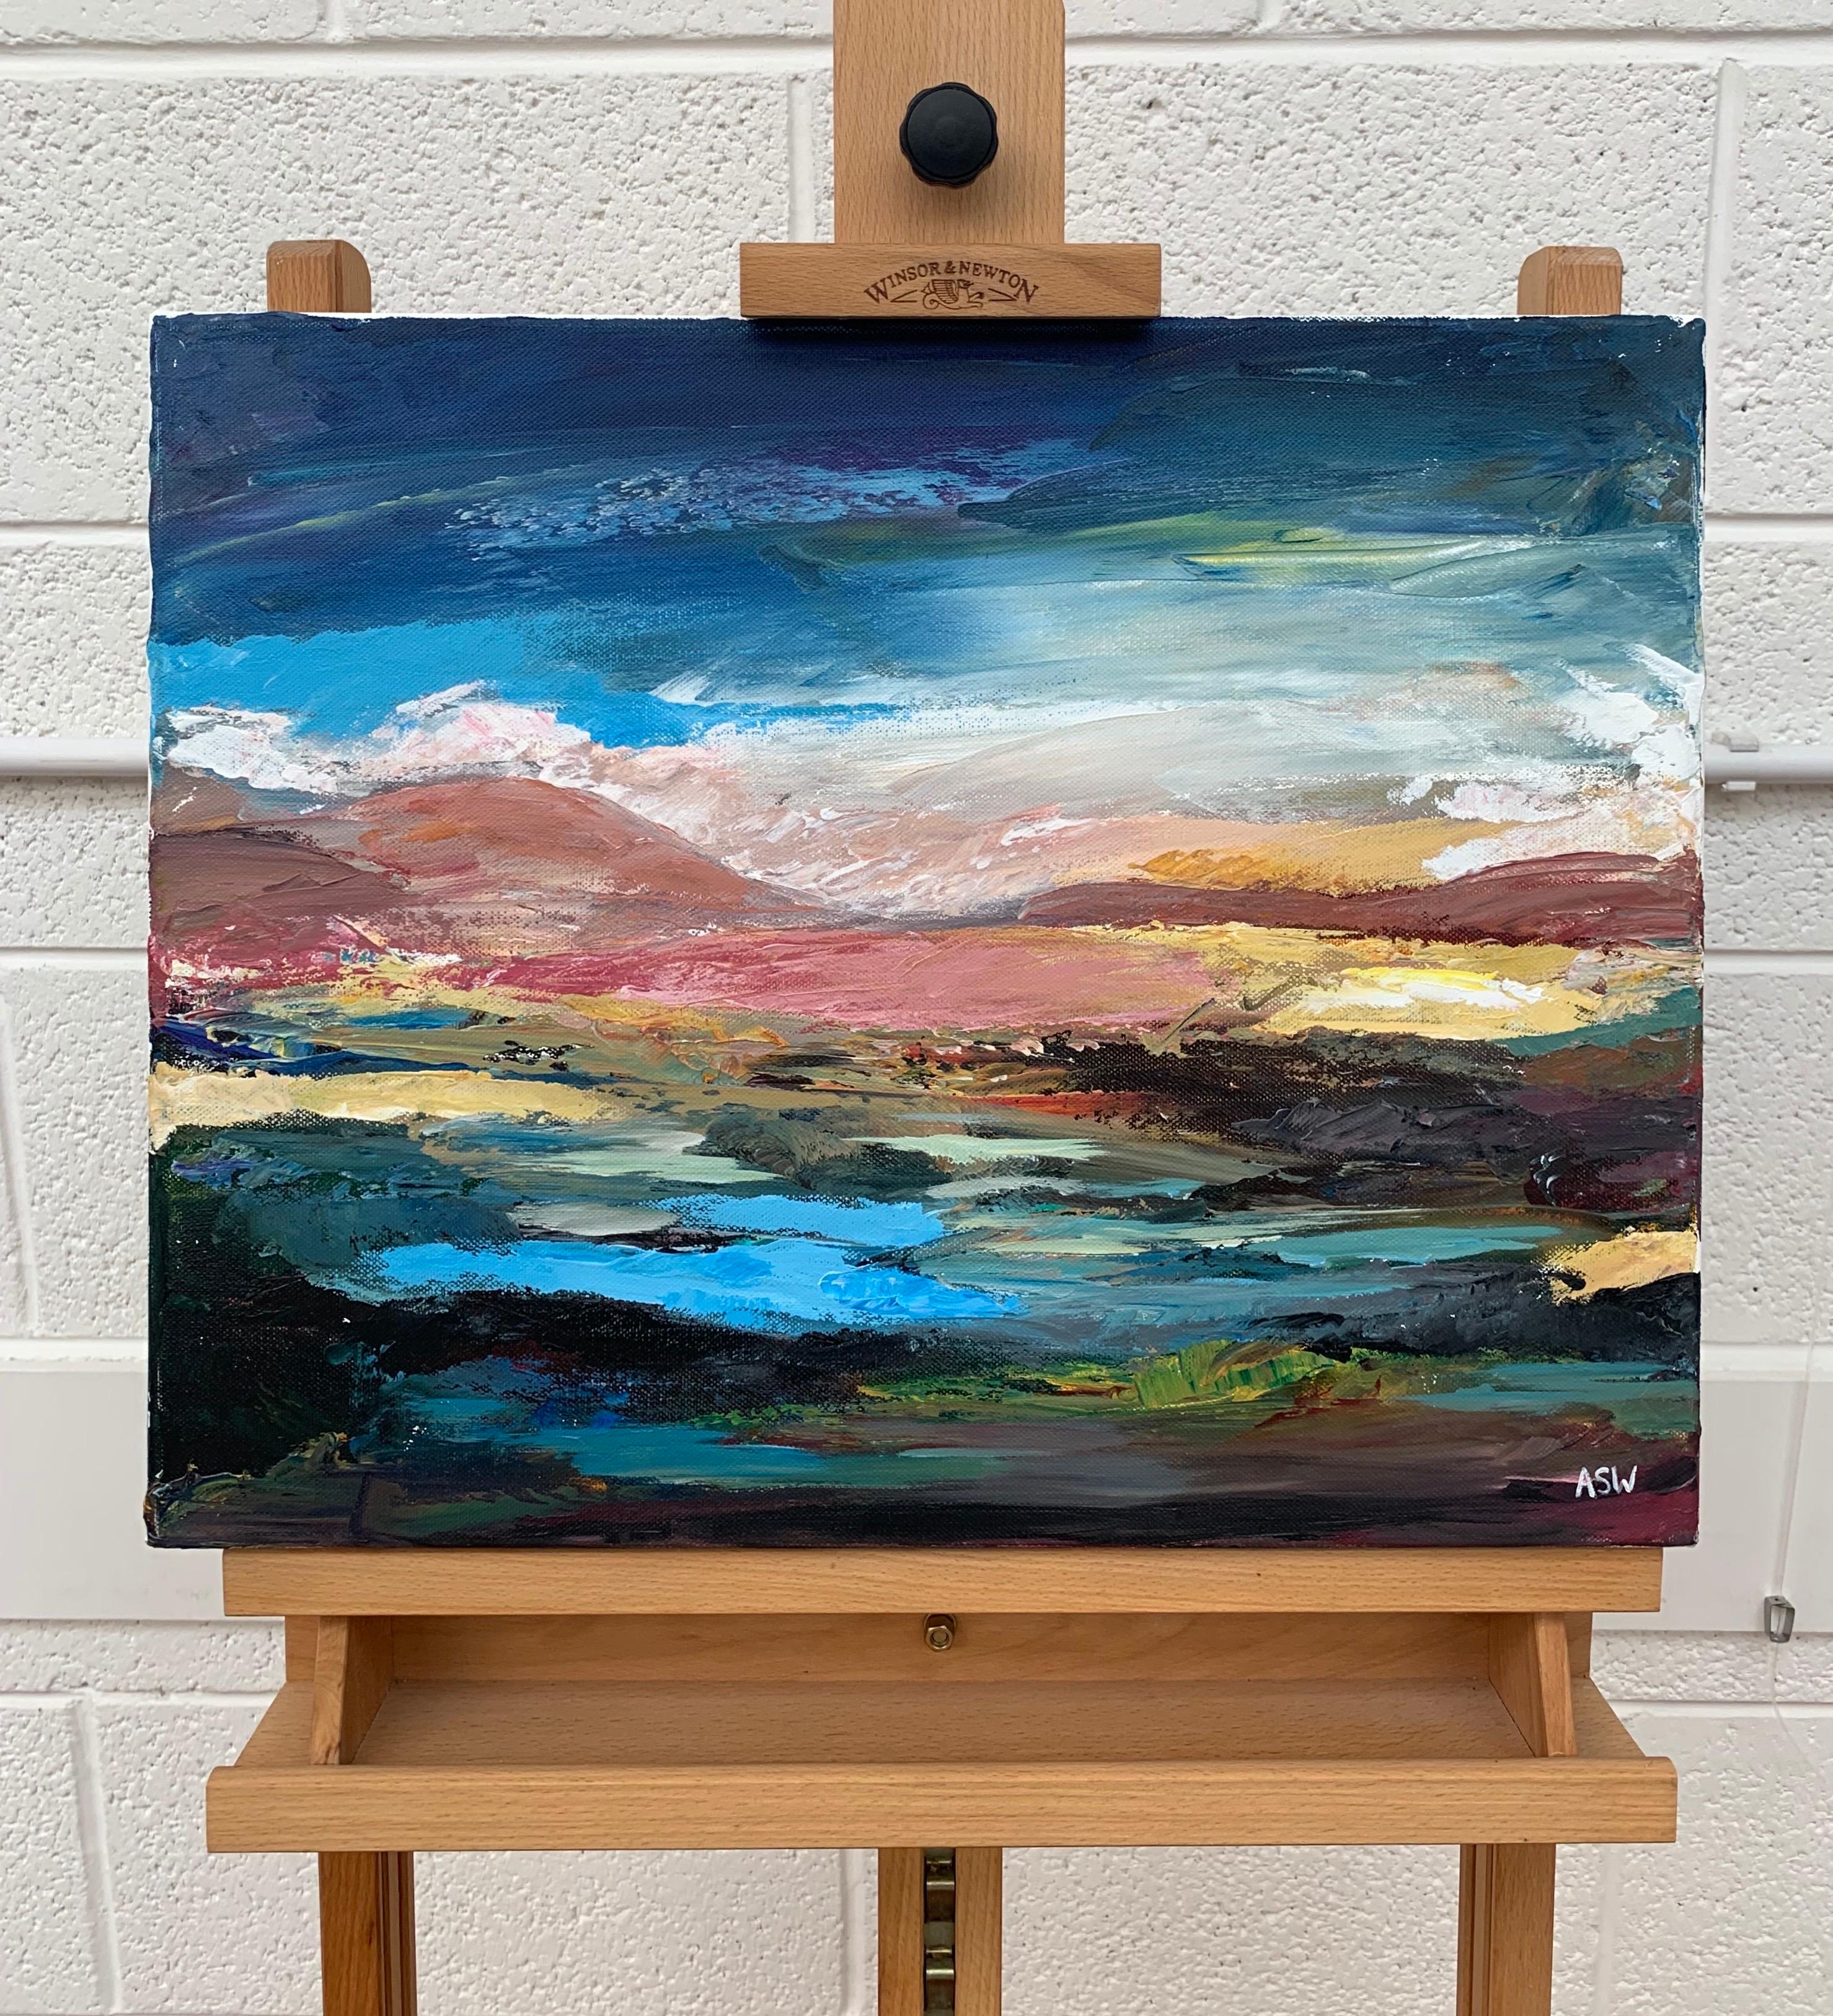 Colourful Expressive Abstract Mountain Landscape Scene by Contemporary British Artist

Art measures 20 x 16 inches
Frame measures 25 x 21 inches

Angela Wakefield has twice been on the front cover of ‘Art of England’ and featured in ARTnews,